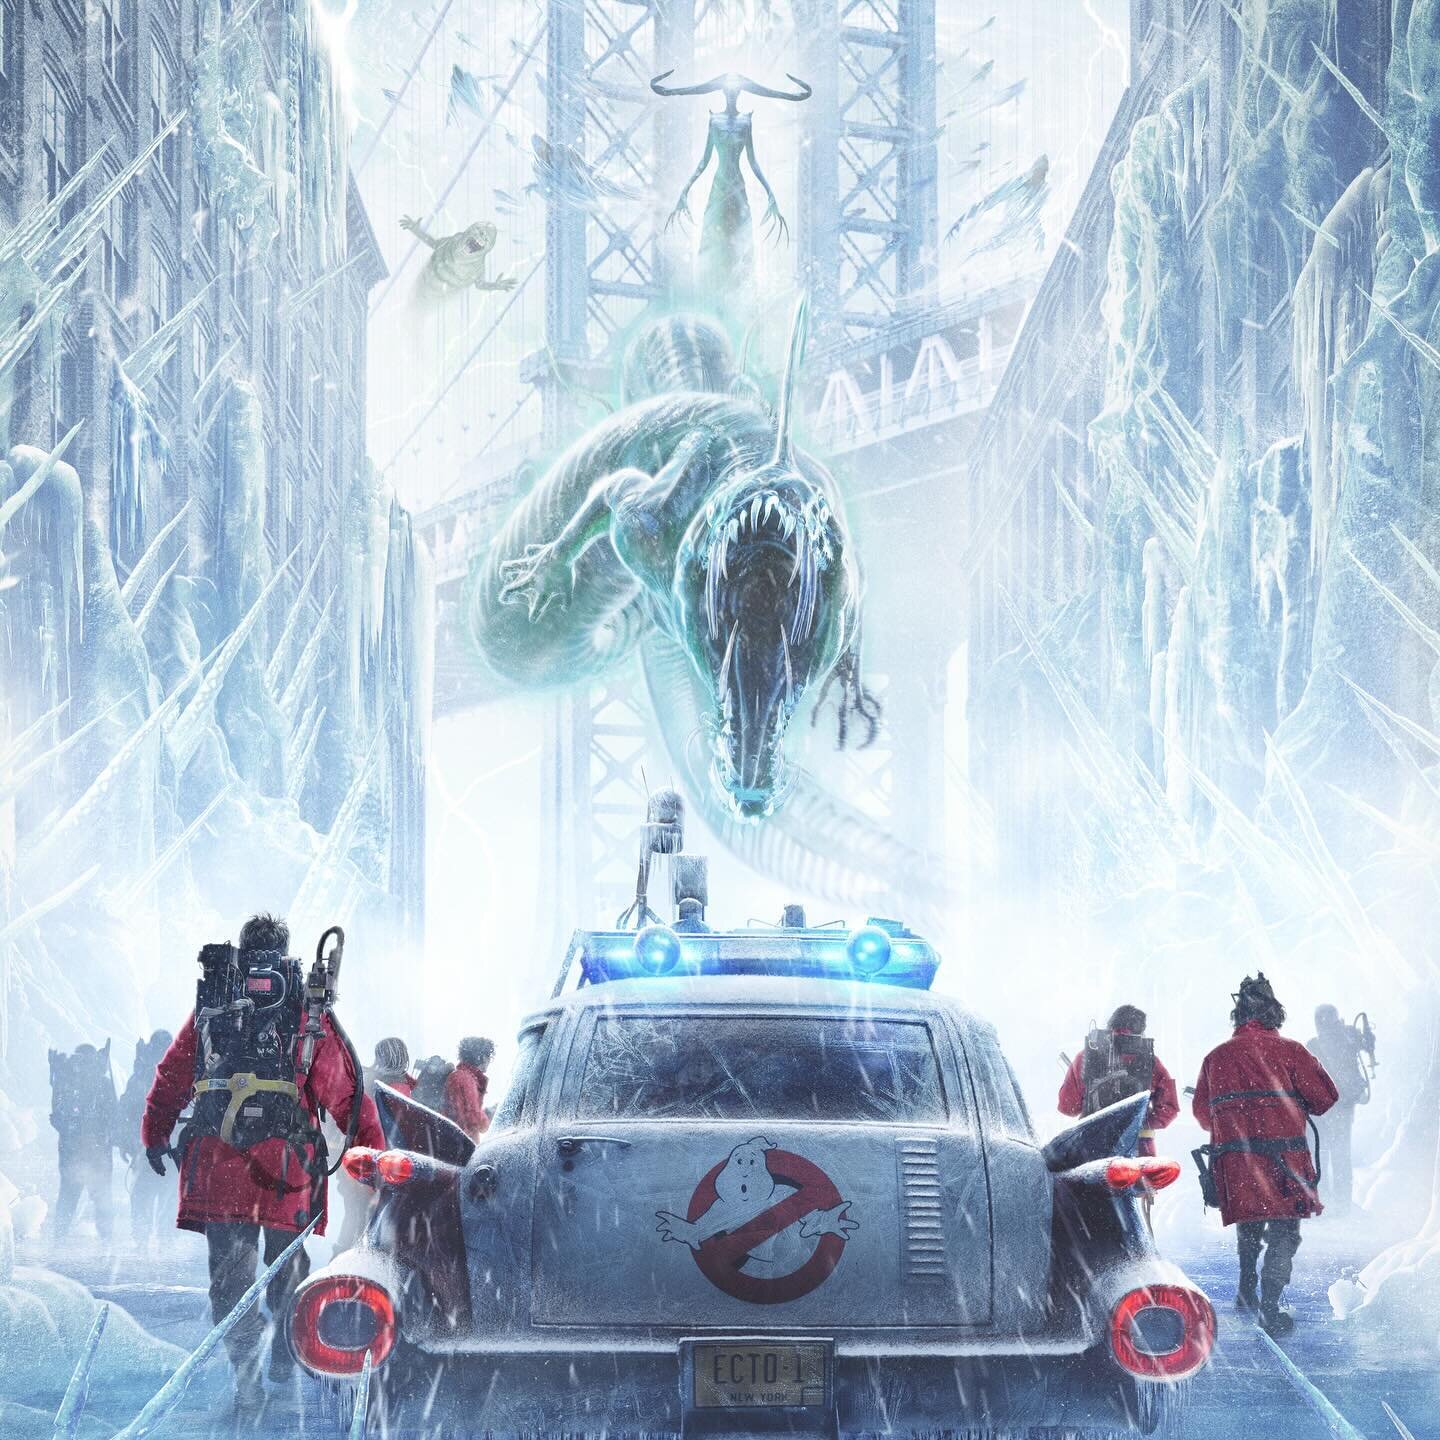 Ghostbusters! In the snow! Dear 8-year-old me, I have a lot to tell you&hellip; 

March 29th! Be there! 👻 ❄️